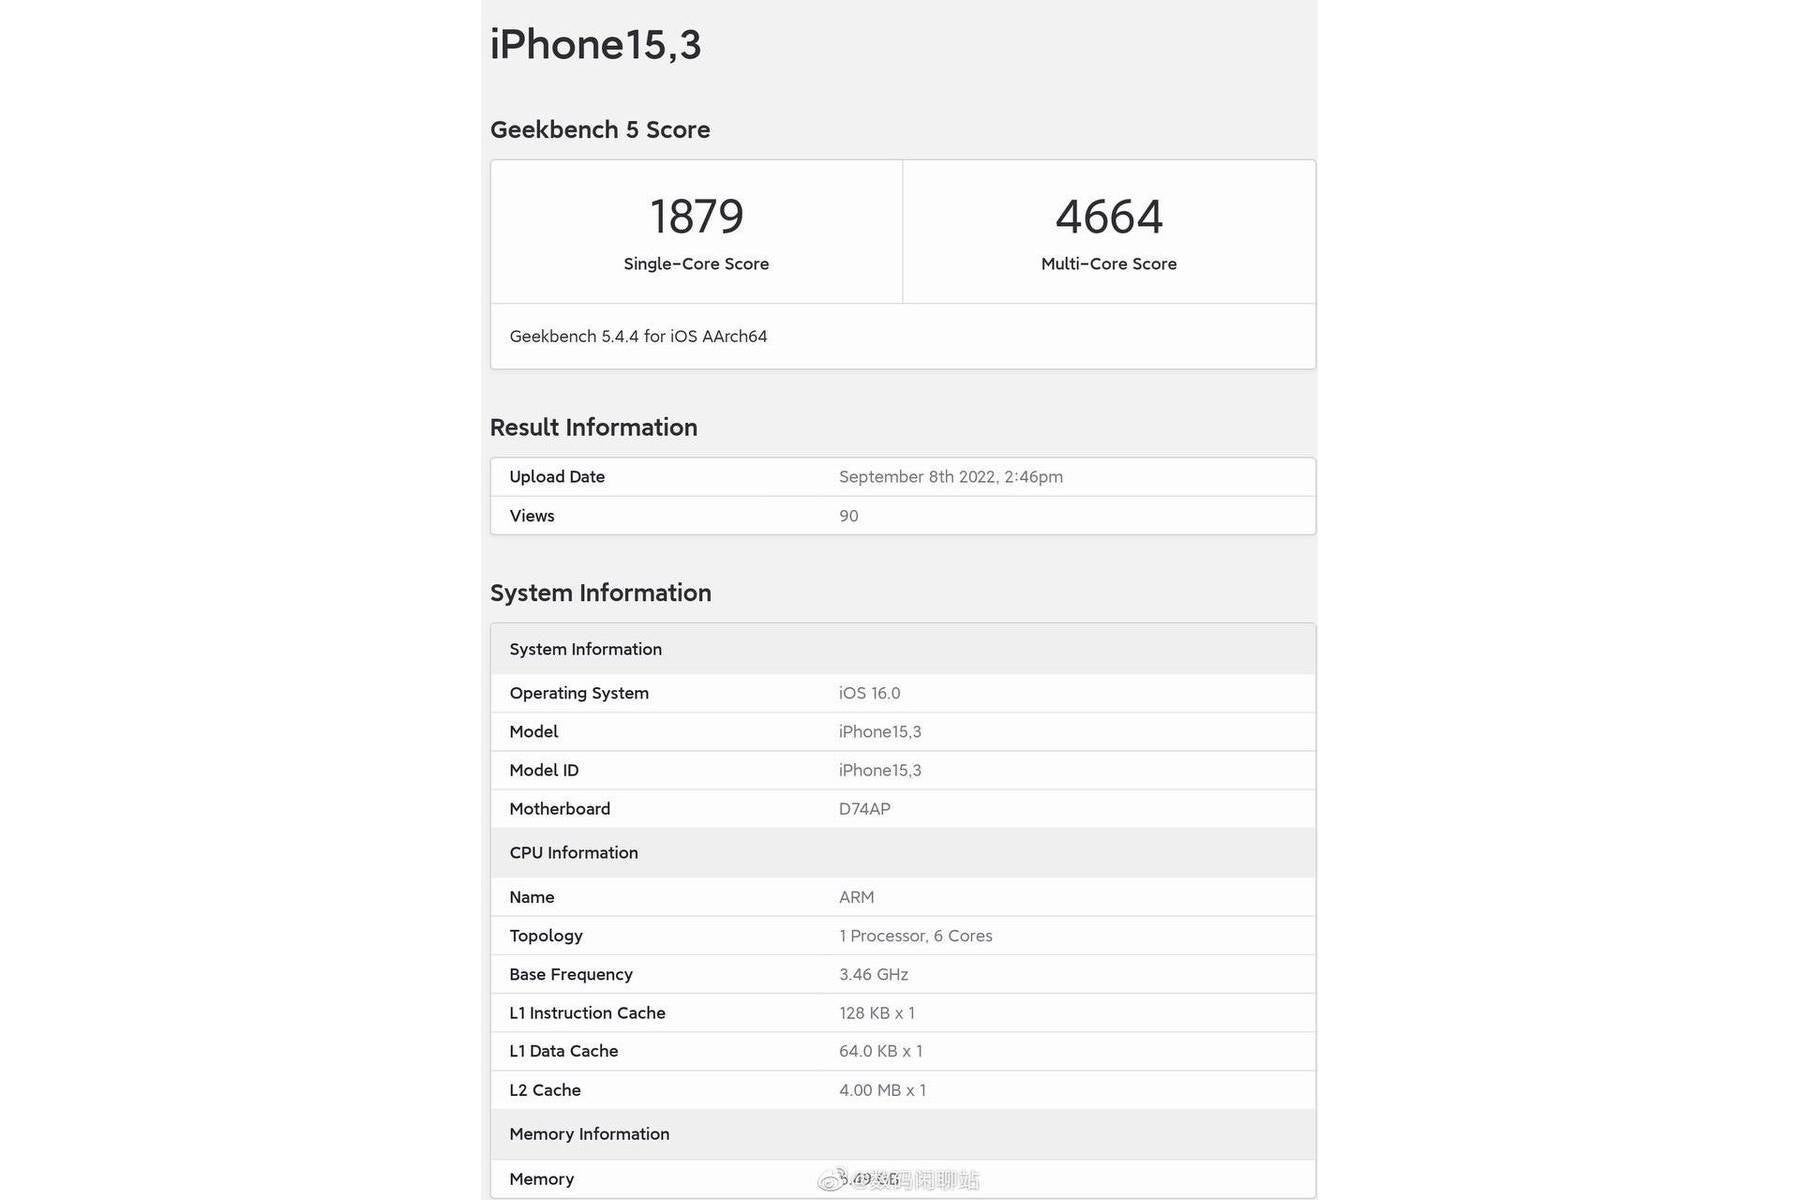 Alleged iPhone 14 Pro benchmark scores - iPhone 14 Pro's powerful A16 Bionic chip destroys Android competition in benchmark results